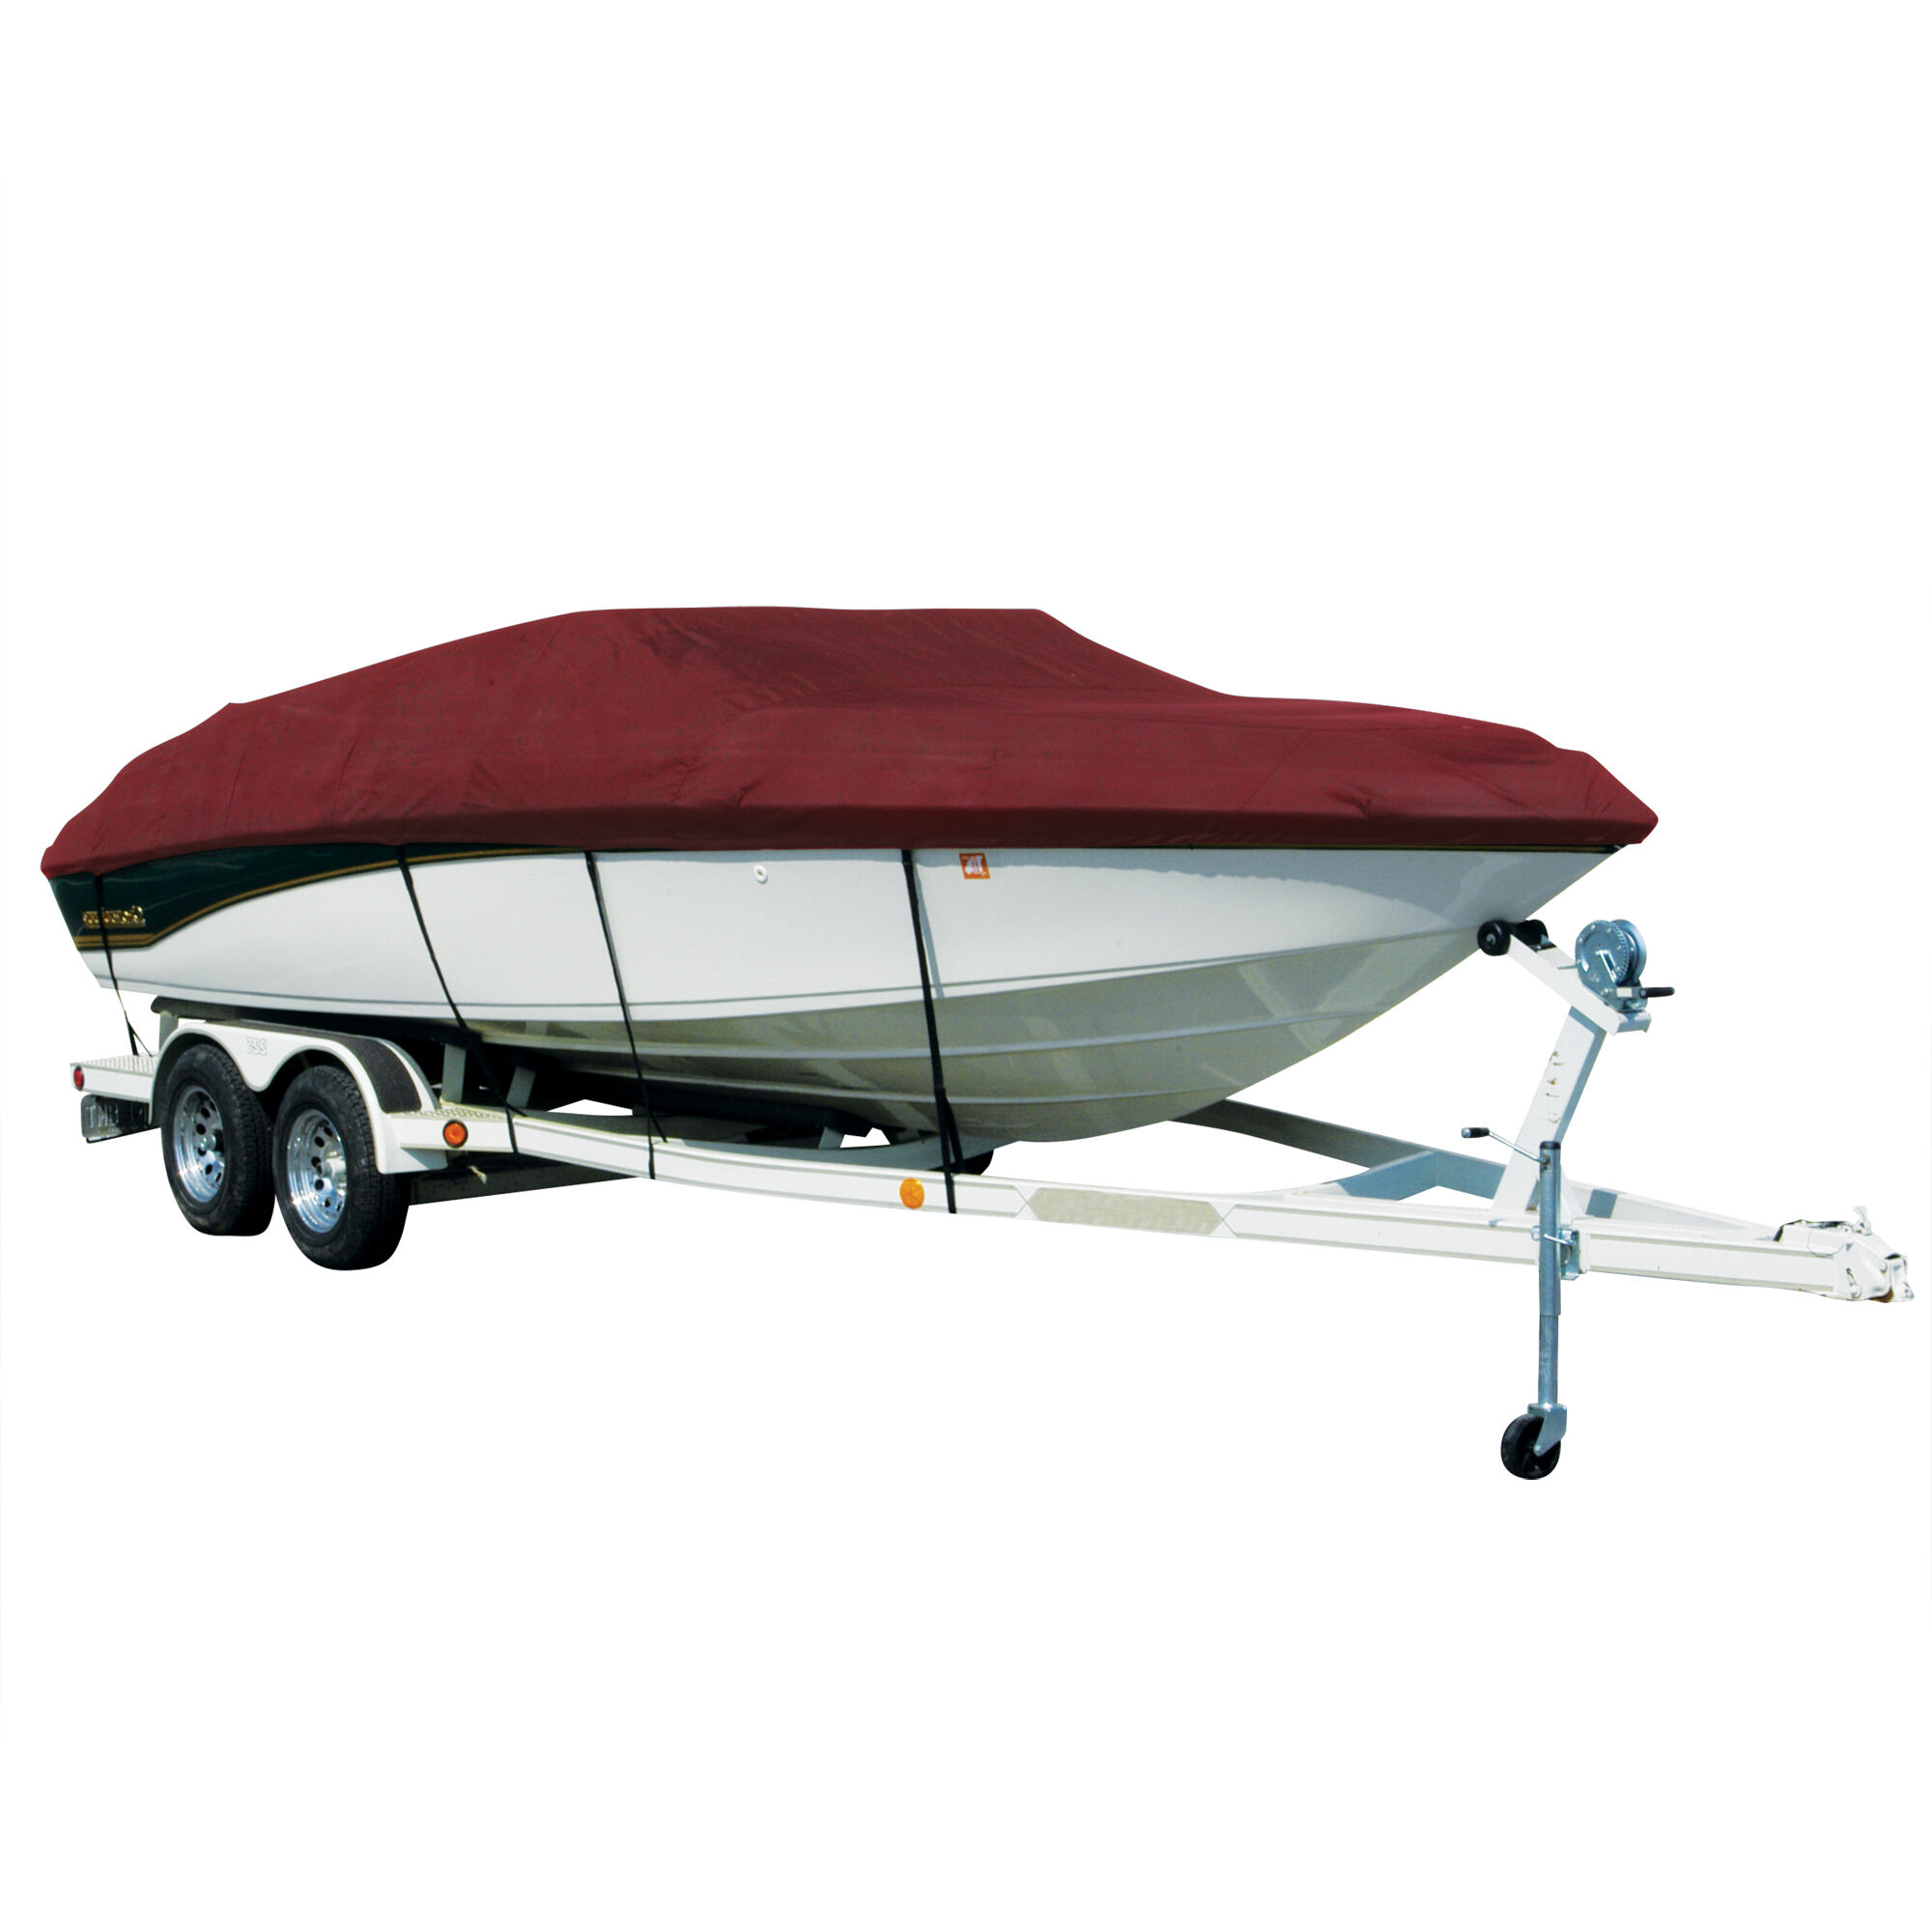 Covermate Exact Fit Sharkskin Boat Cover For SEASWIRL STRIPER 2100 HARD TOP in Burgundy